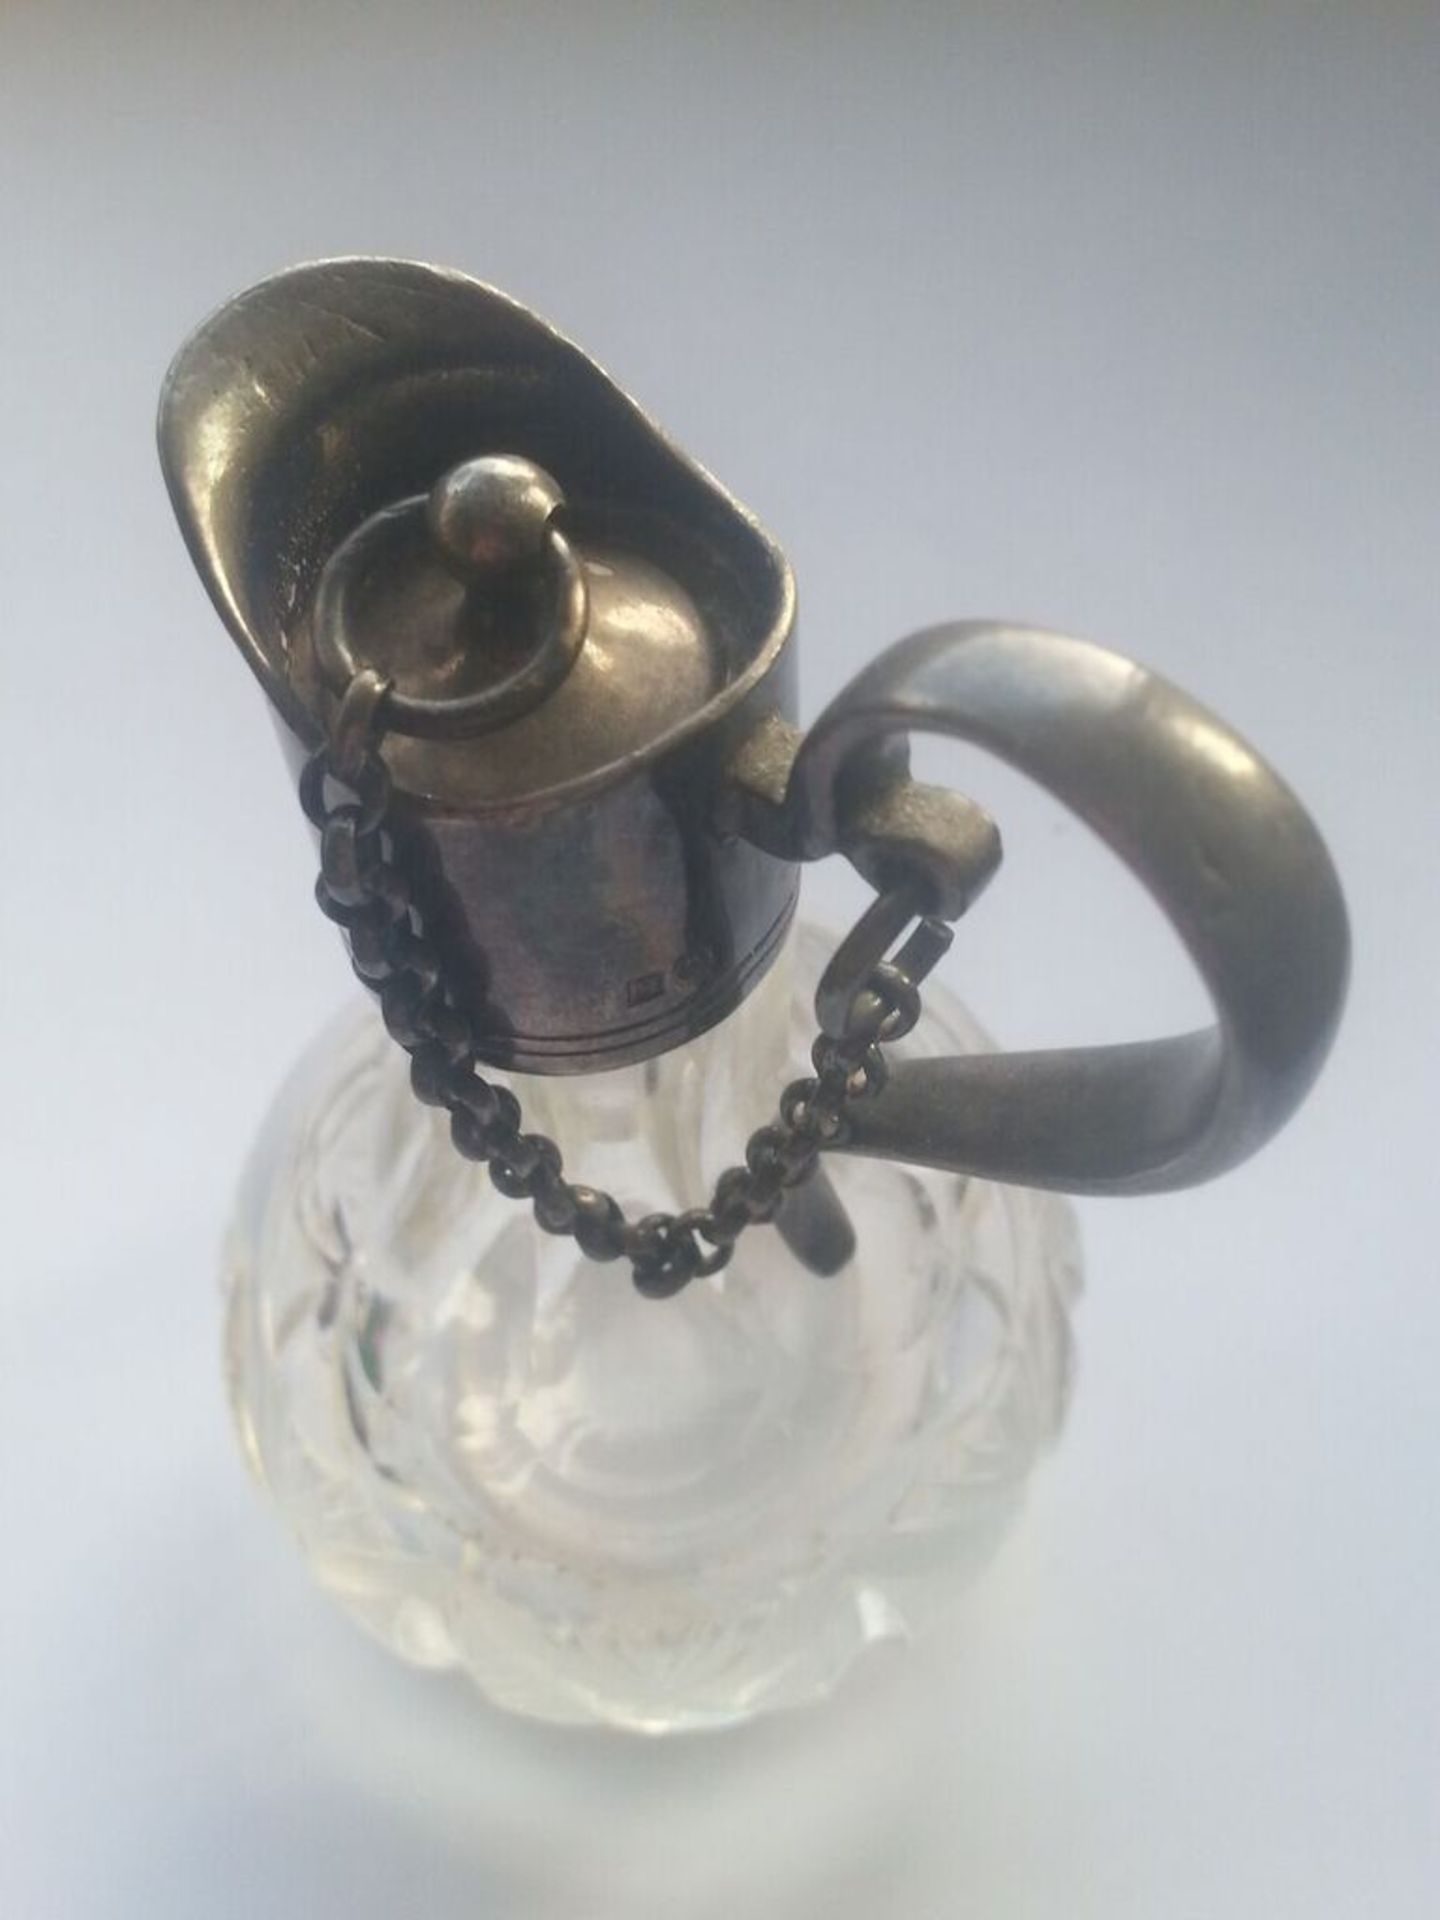 Stunning antique silver hallmarked (possibly Scottish - Glasgow) cut glass ewer with heavy stopper - Image 2 of 3